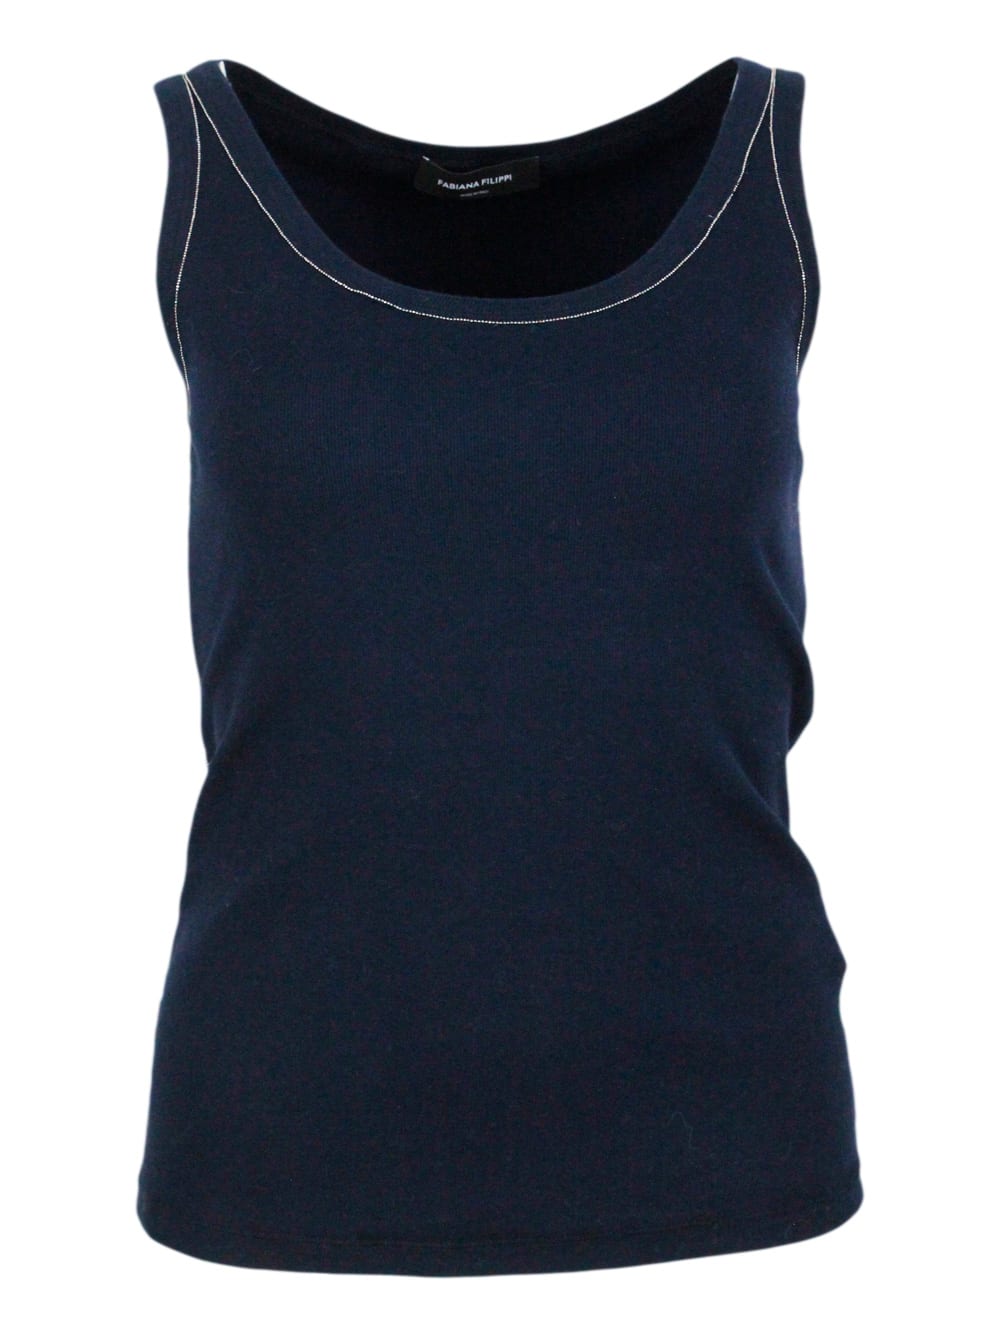 Sleeveless T-shirt, Ribbed Cotton Tank Top With U-neck, Elbow-length Sleeves Embellished With Rows Of Monili On The Neck And Sides